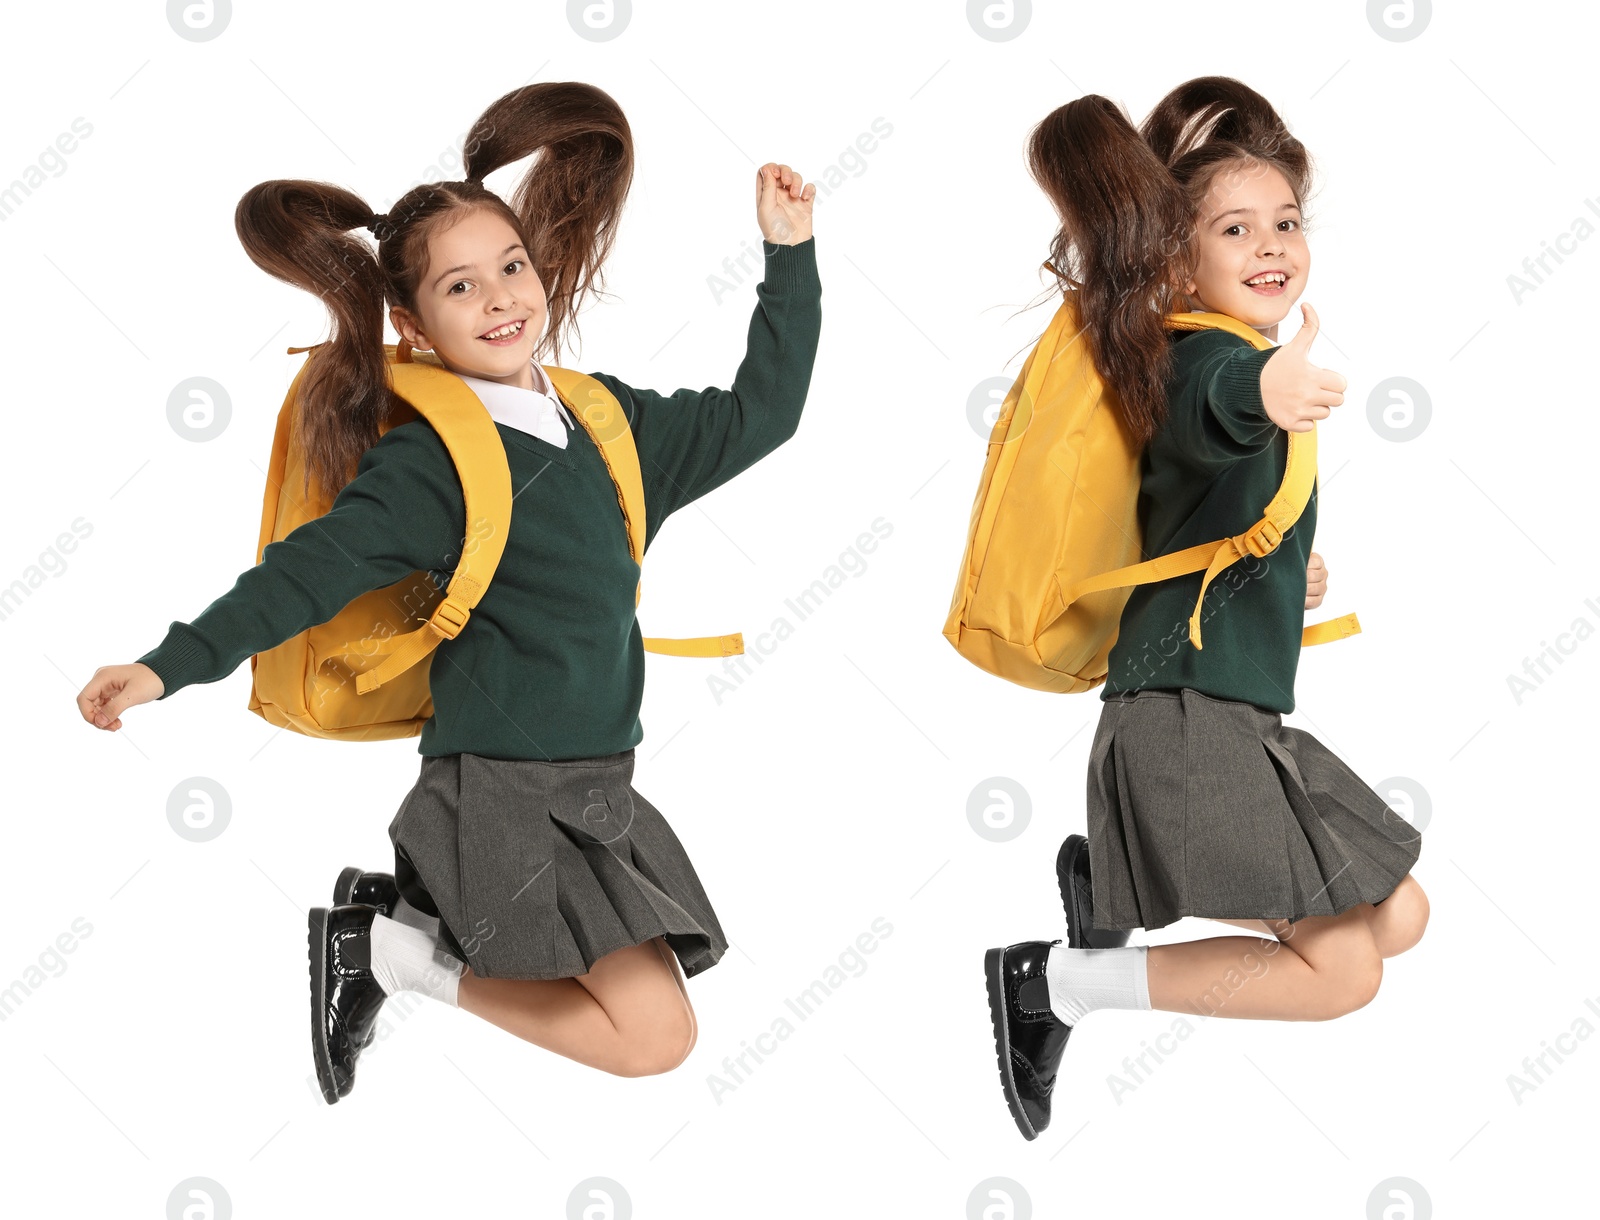 Image of Girl in school uniform jumping on white background